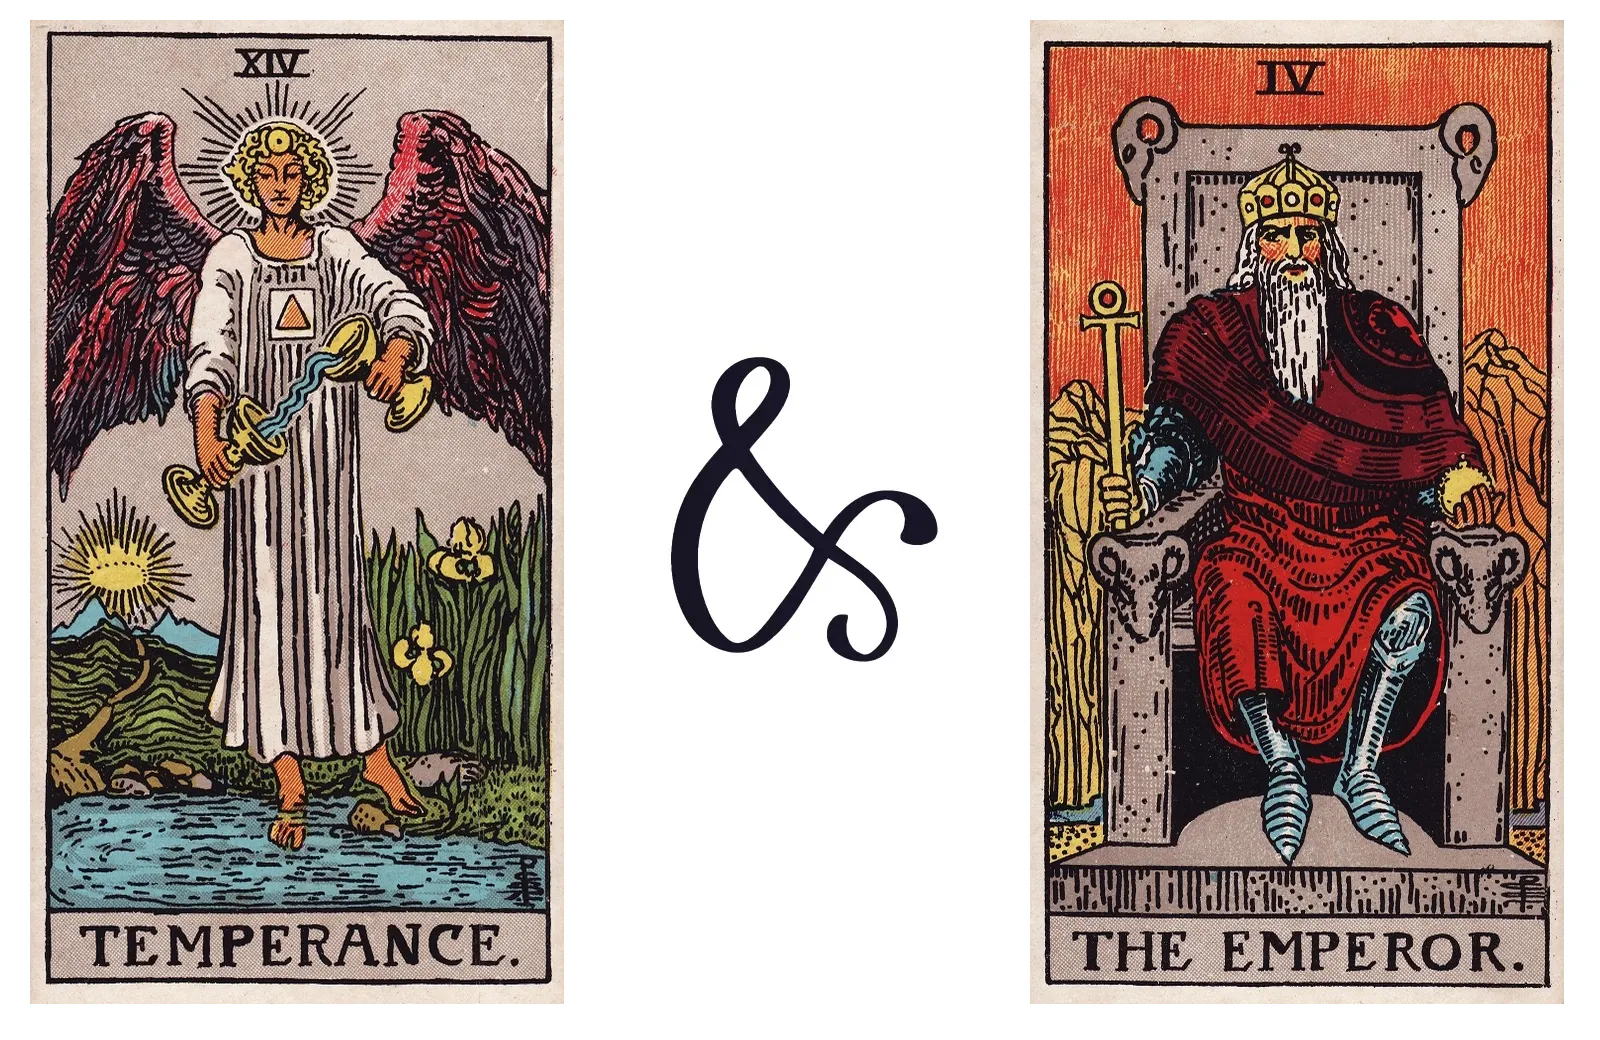 Temperance and The Emperor